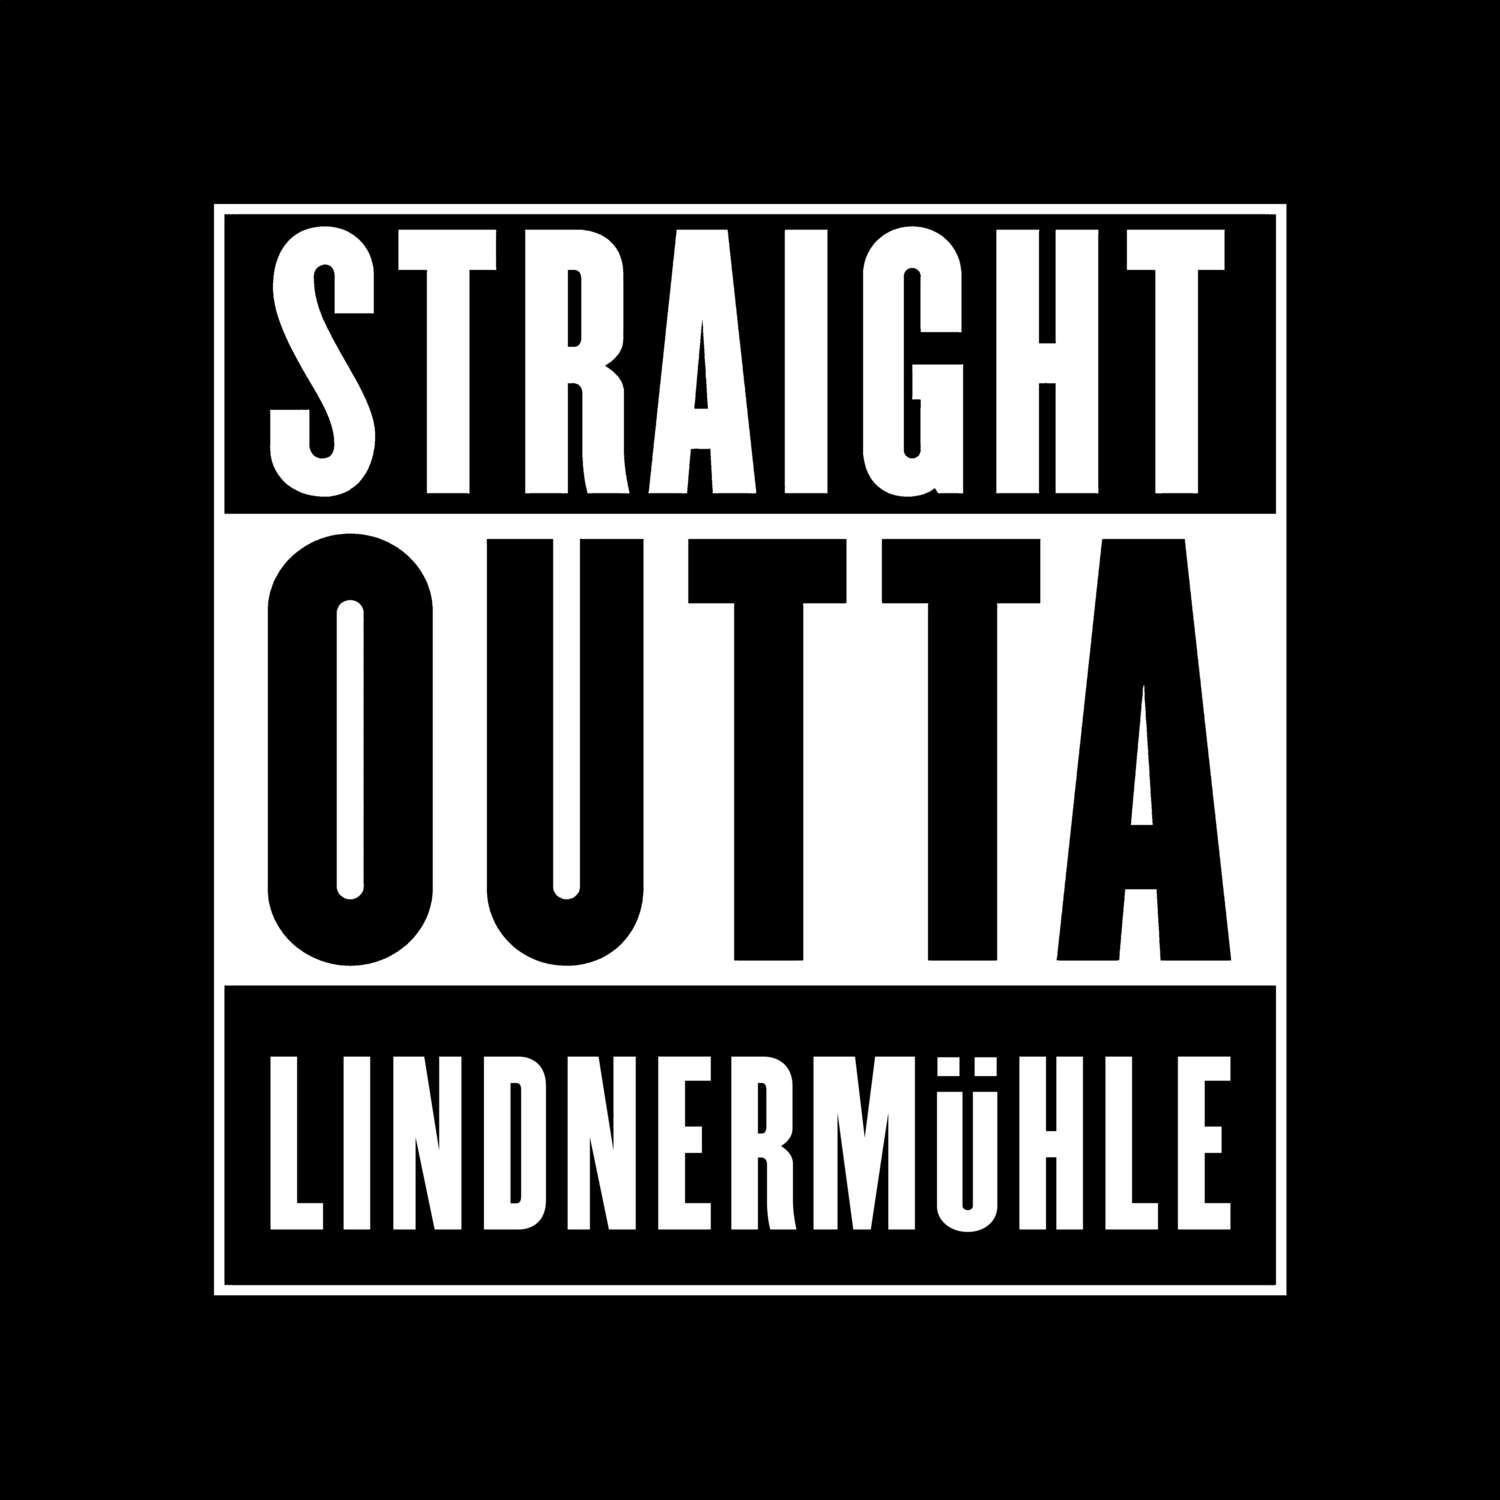 Lindnermühle T-Shirt »Straight Outta«